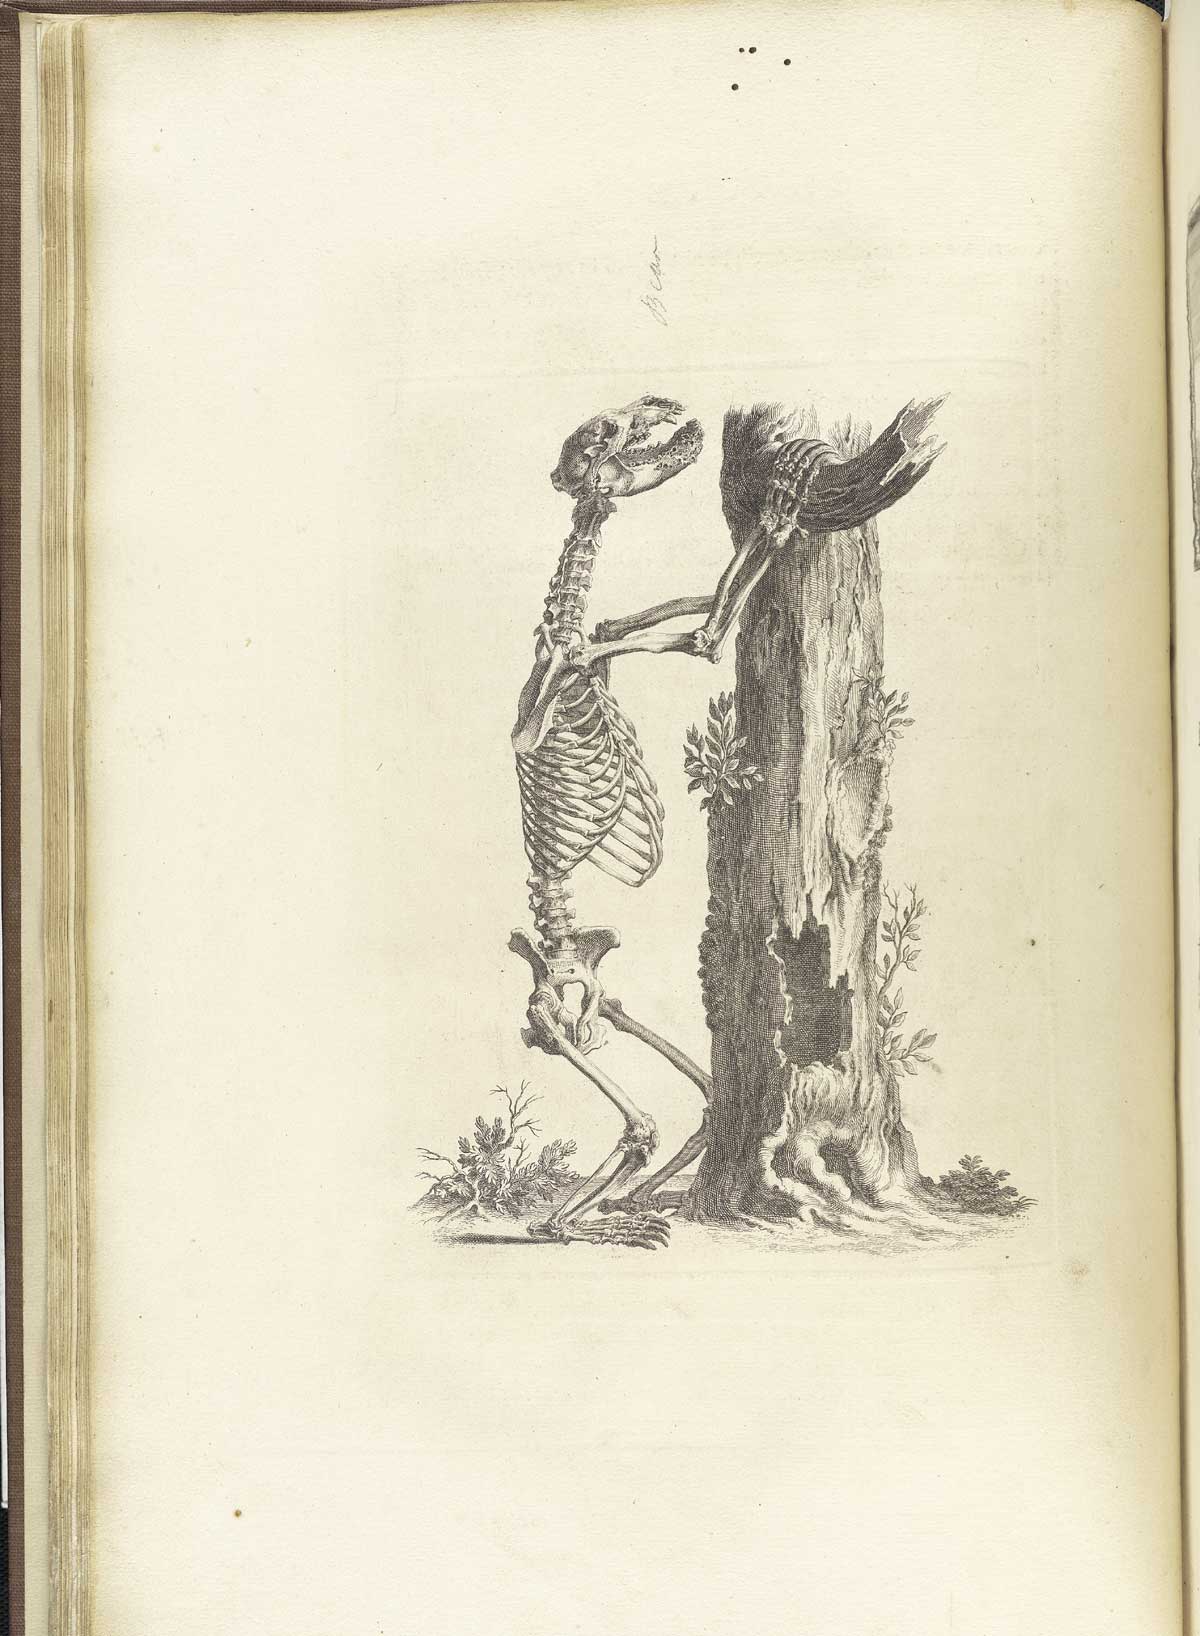 Engraving of a bear skeleton which appears to be attempting to climb a hollow tree, from William Cheselden’s Osteographia, NLM Call no.: WZ 260 C499o 1733.